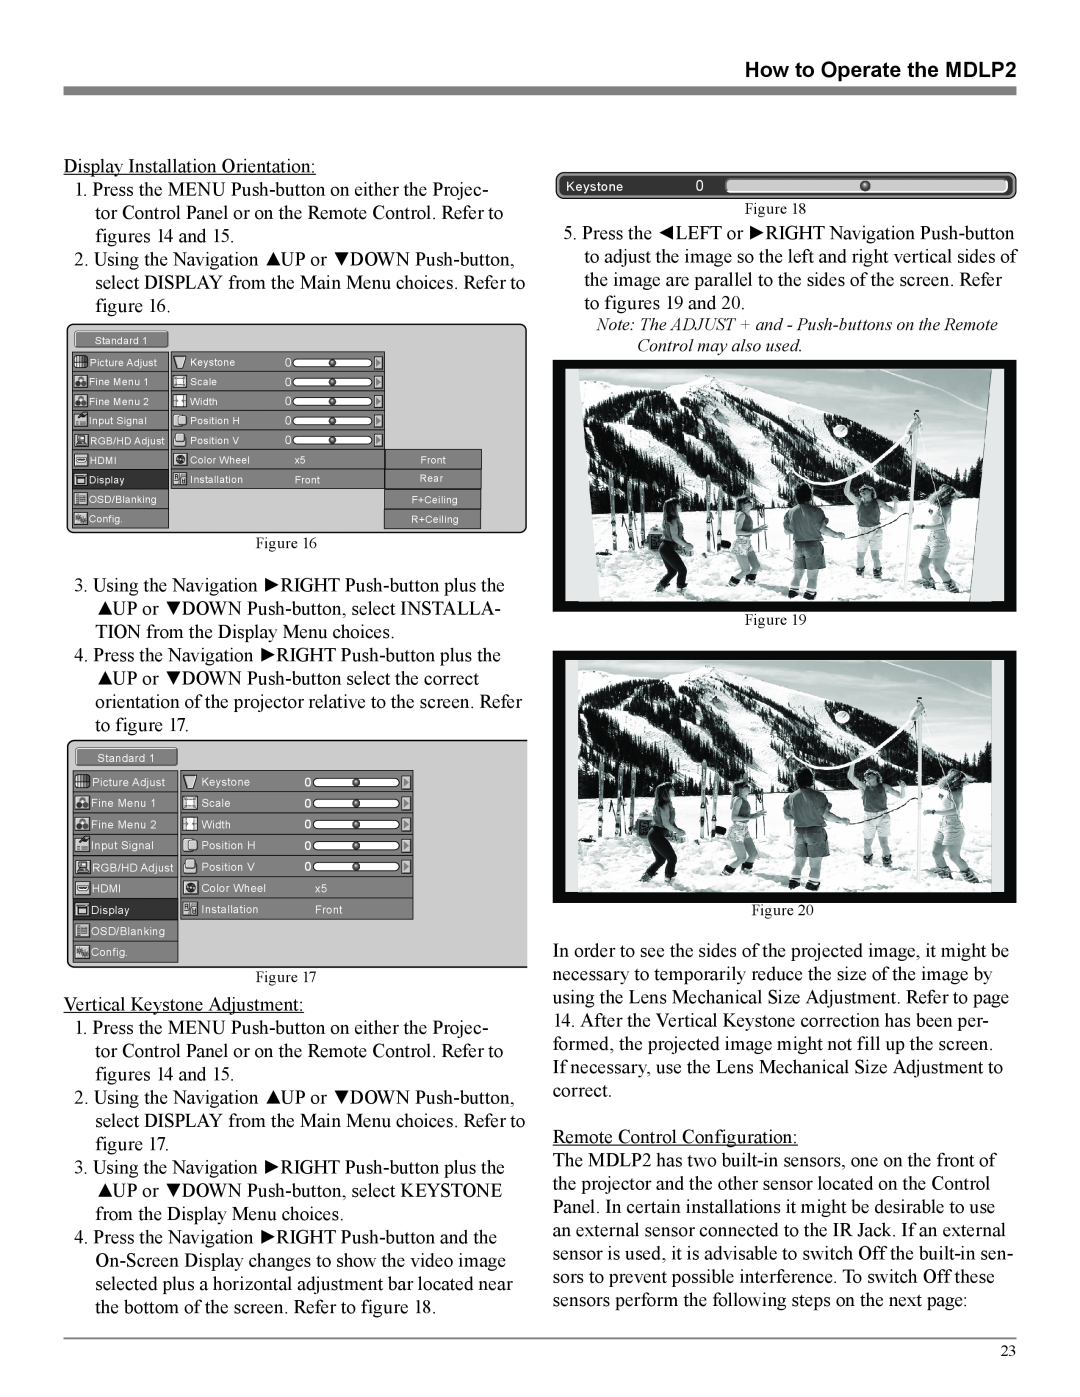 McIntosh owner manual How to Operate the MDLP2, Keystone0, R+Ceiling 